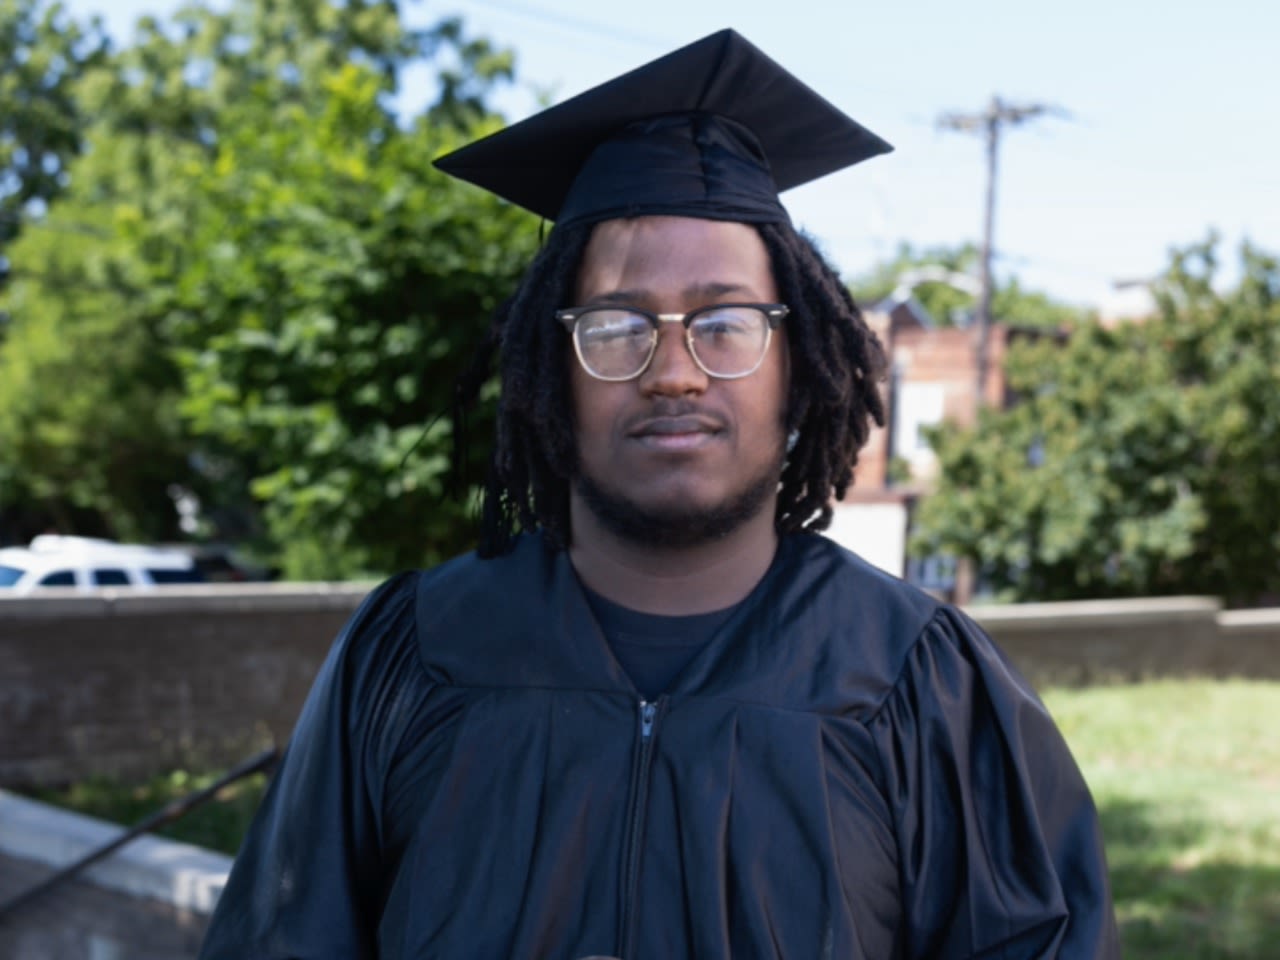 N.J. teen didn’t think he’d graduate so he left school. A phone call changed everything.